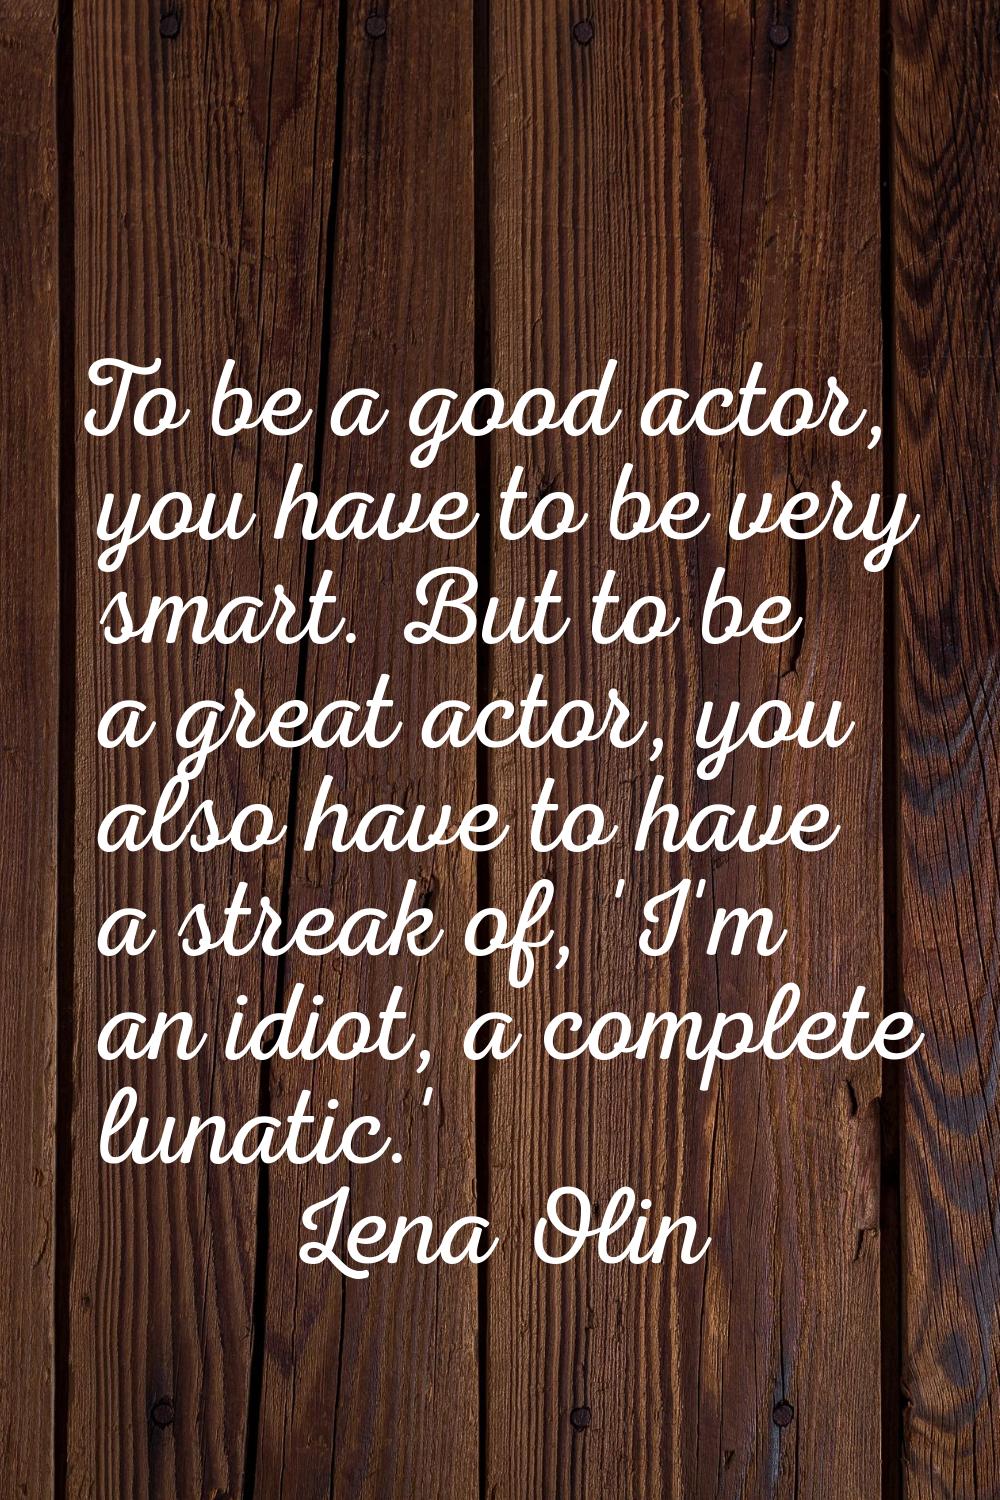 To be a good actor, you have to be very smart. But to be a great actor, you also have to have a str